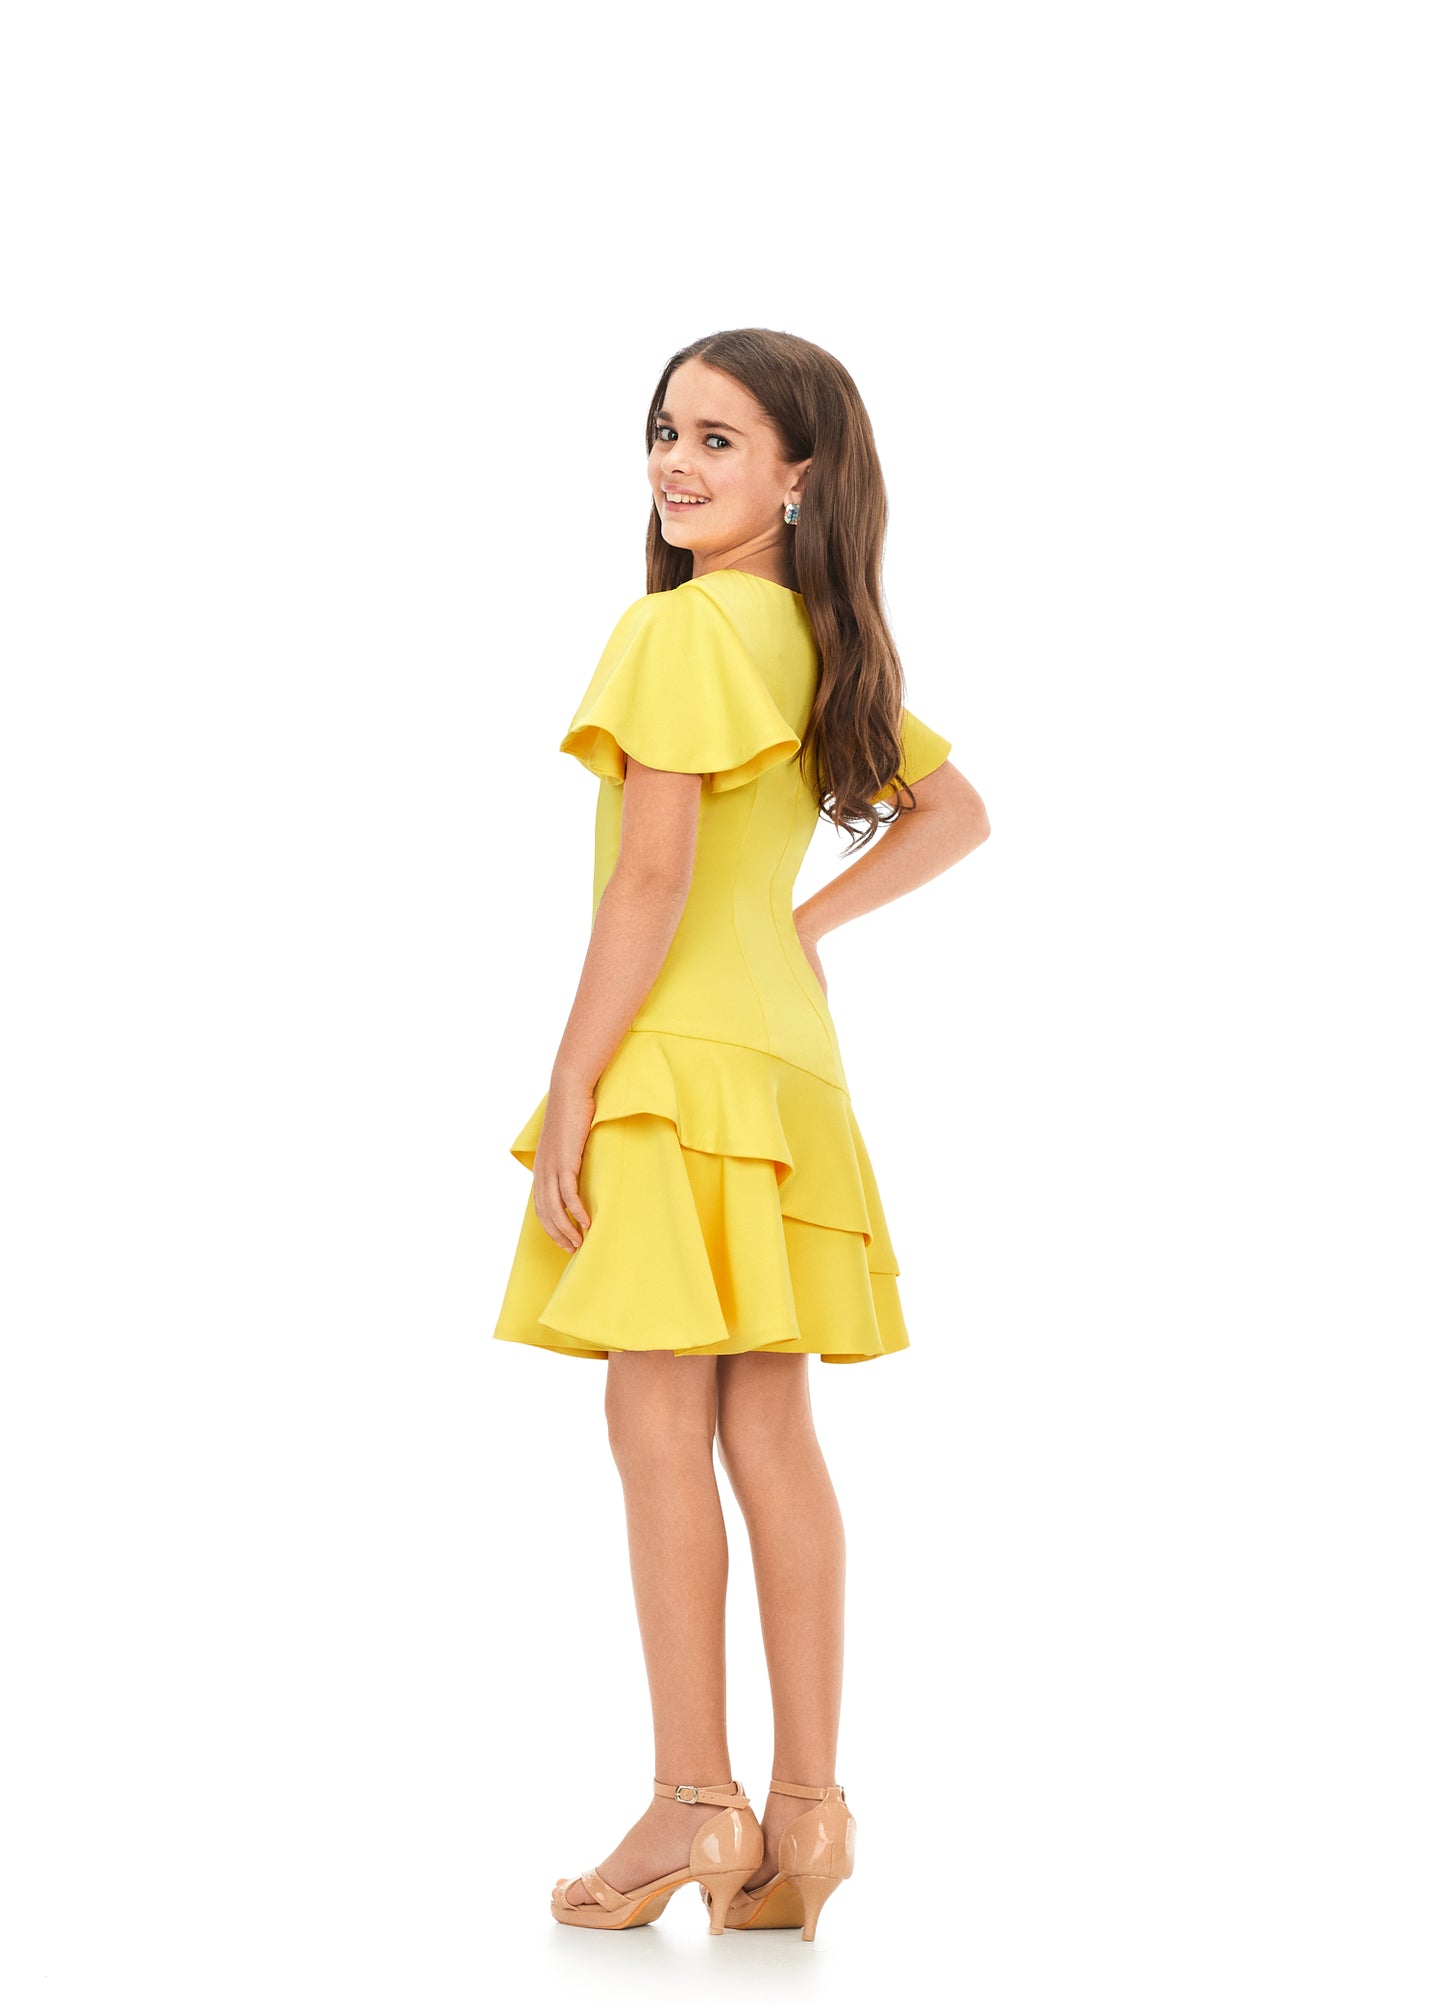 Ashley Lauren Kids 8167 Girls Crepe Cocktail Dress with Ruffle Details A crepe dress perfect for any event. This dress features flutter sleeves and an asymmetric ruffle skirt yellow